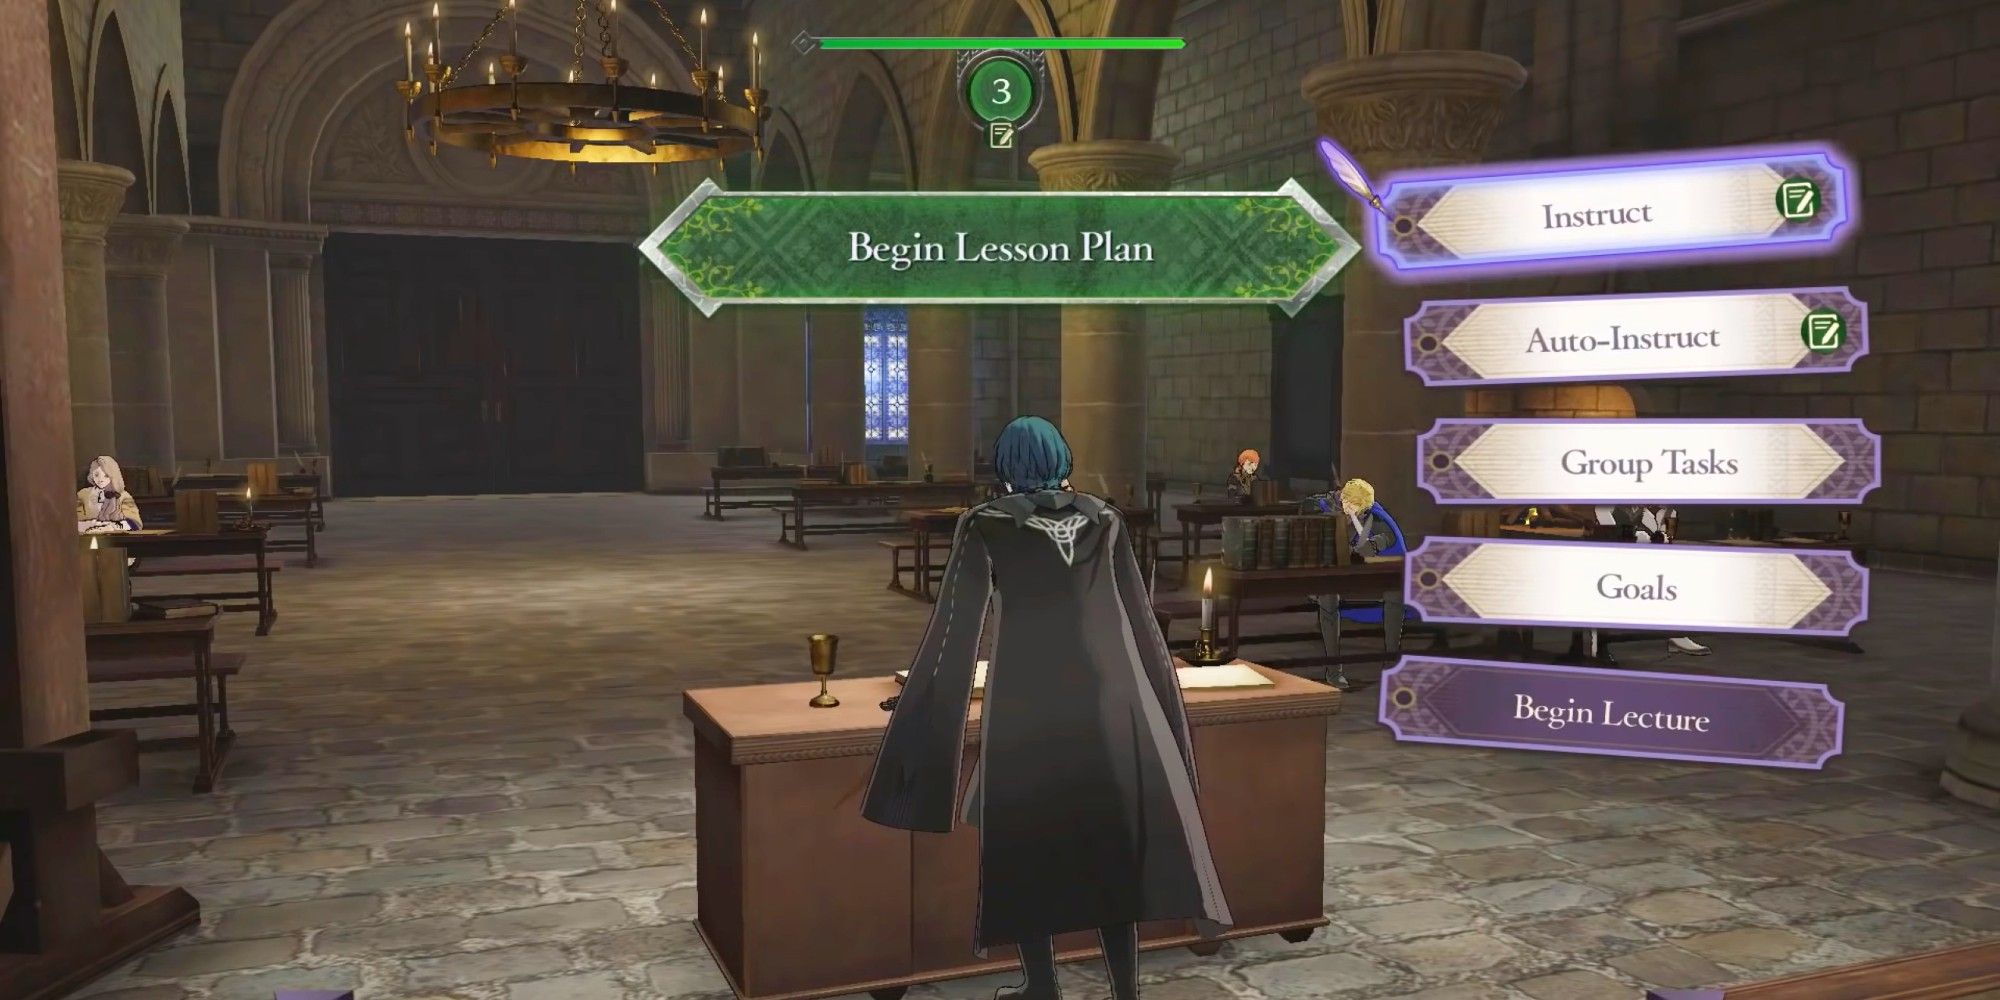 Fire Emblem class is in session